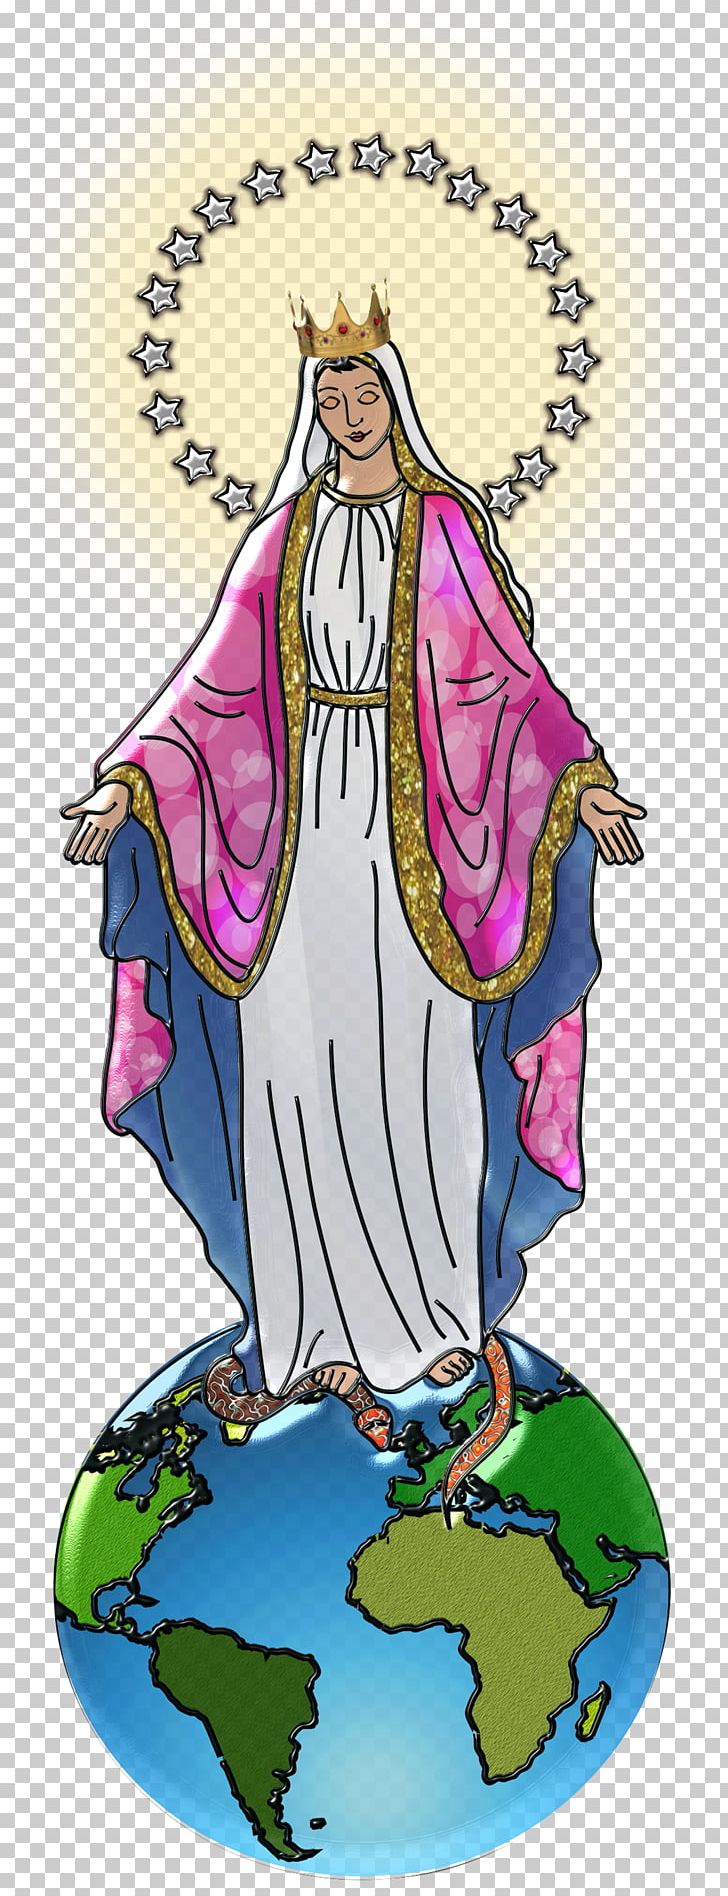 Immaculate Heart Of Mary Queen Of Heaven Ave Maria Holy Card PNG, Clipart, Art, Assumption Of Mary, Ave Maria, Child Jesus, Costume Design Free PNG Download